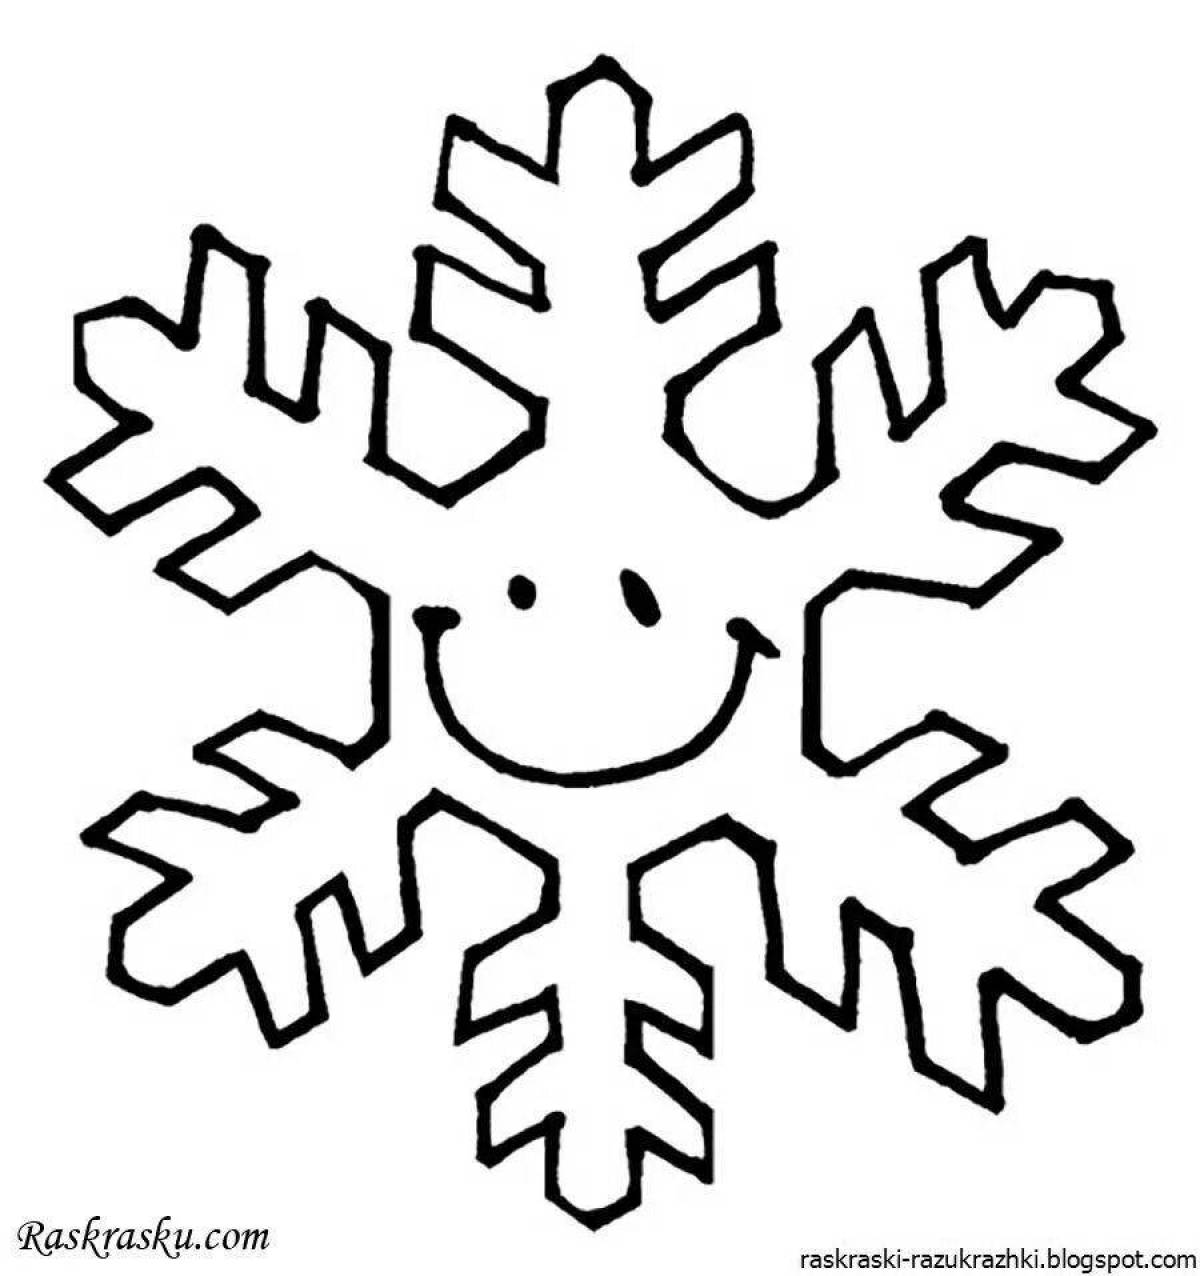 Bright snowflake coloring book for 2-3 year olds